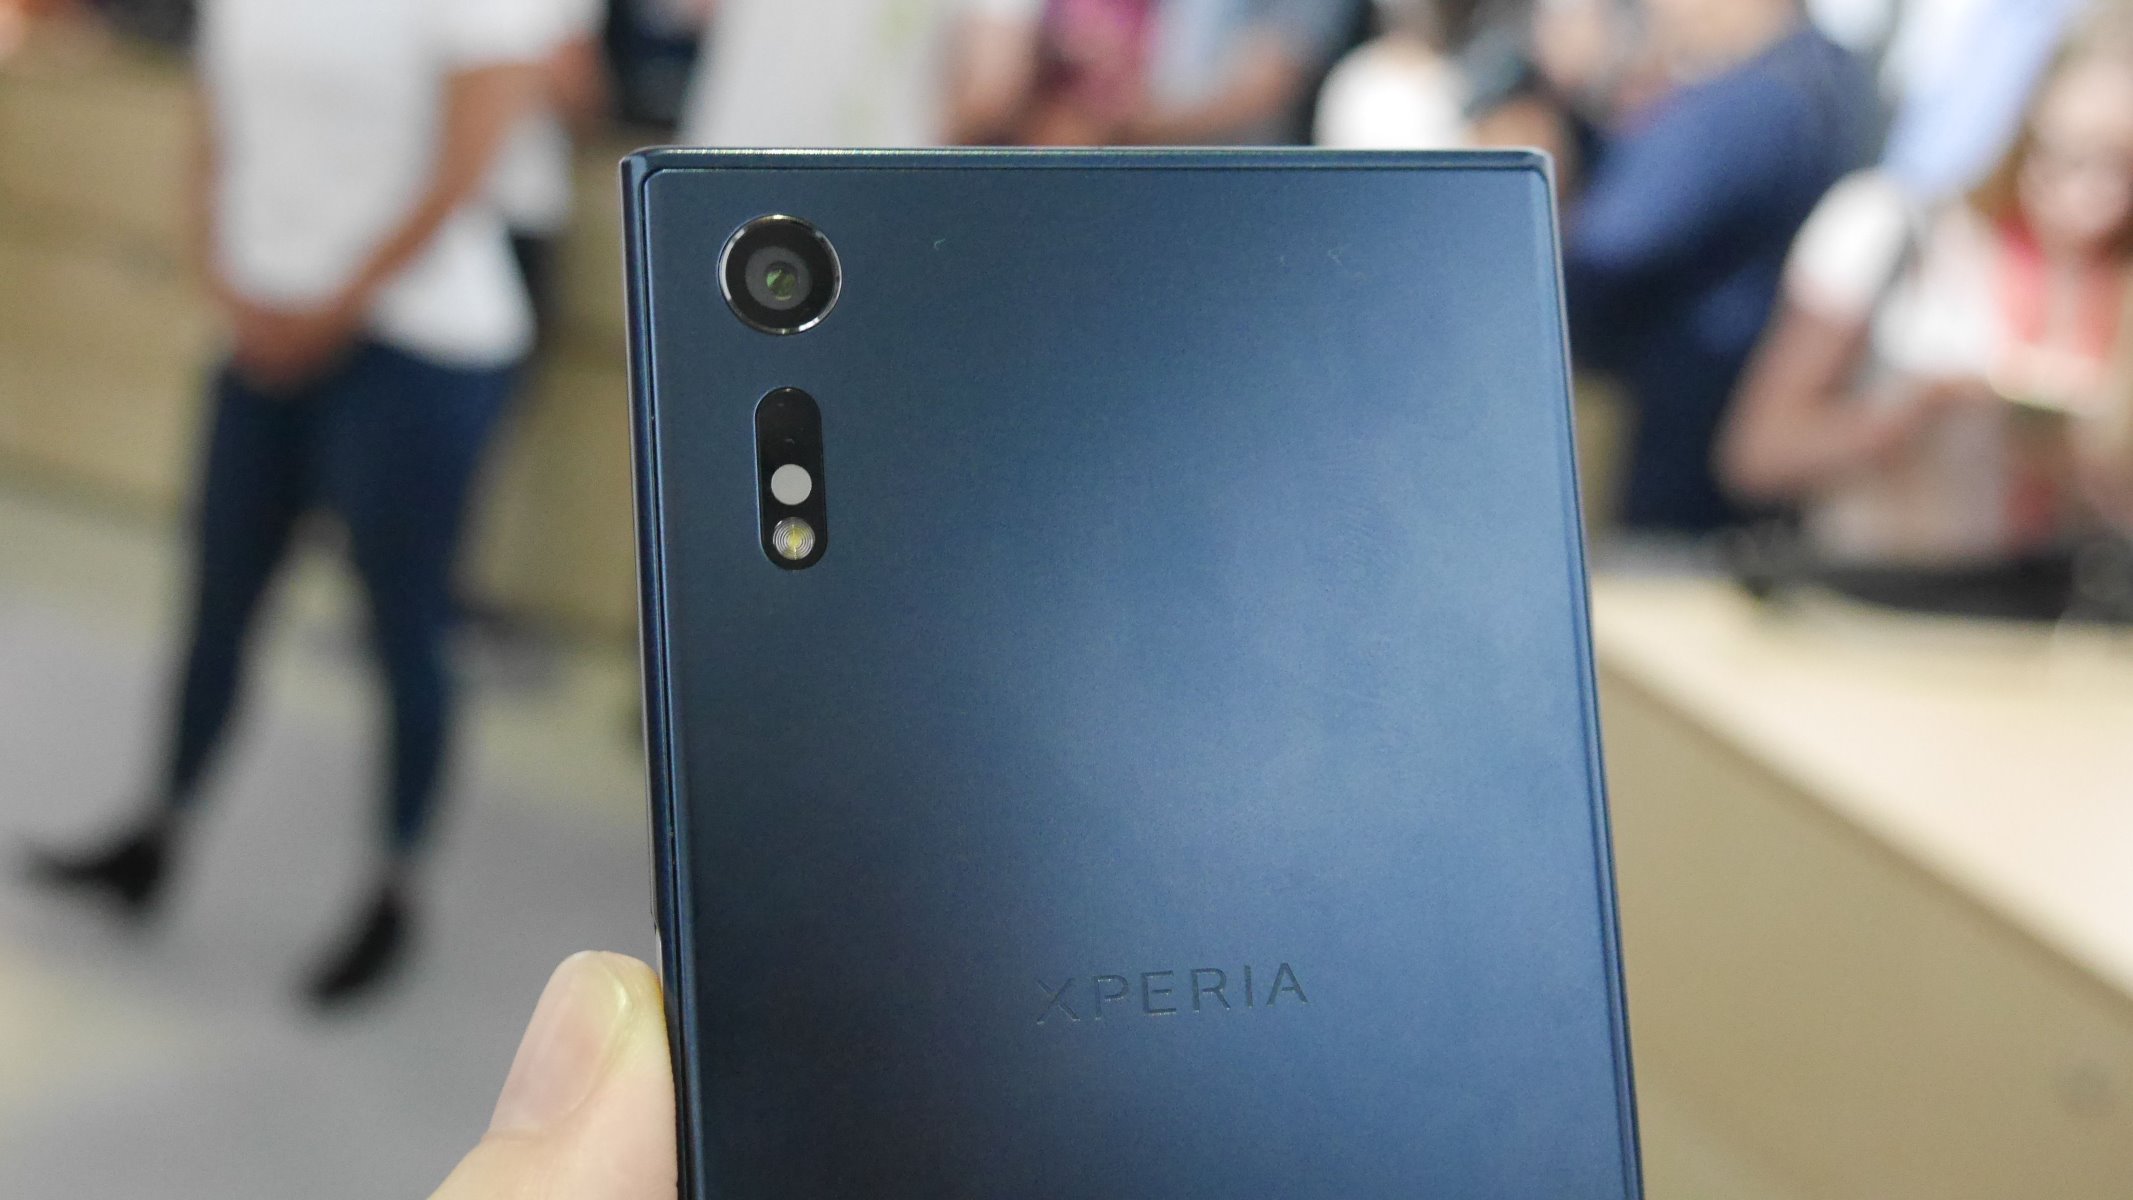 Step-by-Step Guide: Flashing EU Firmware On Xperia XZ